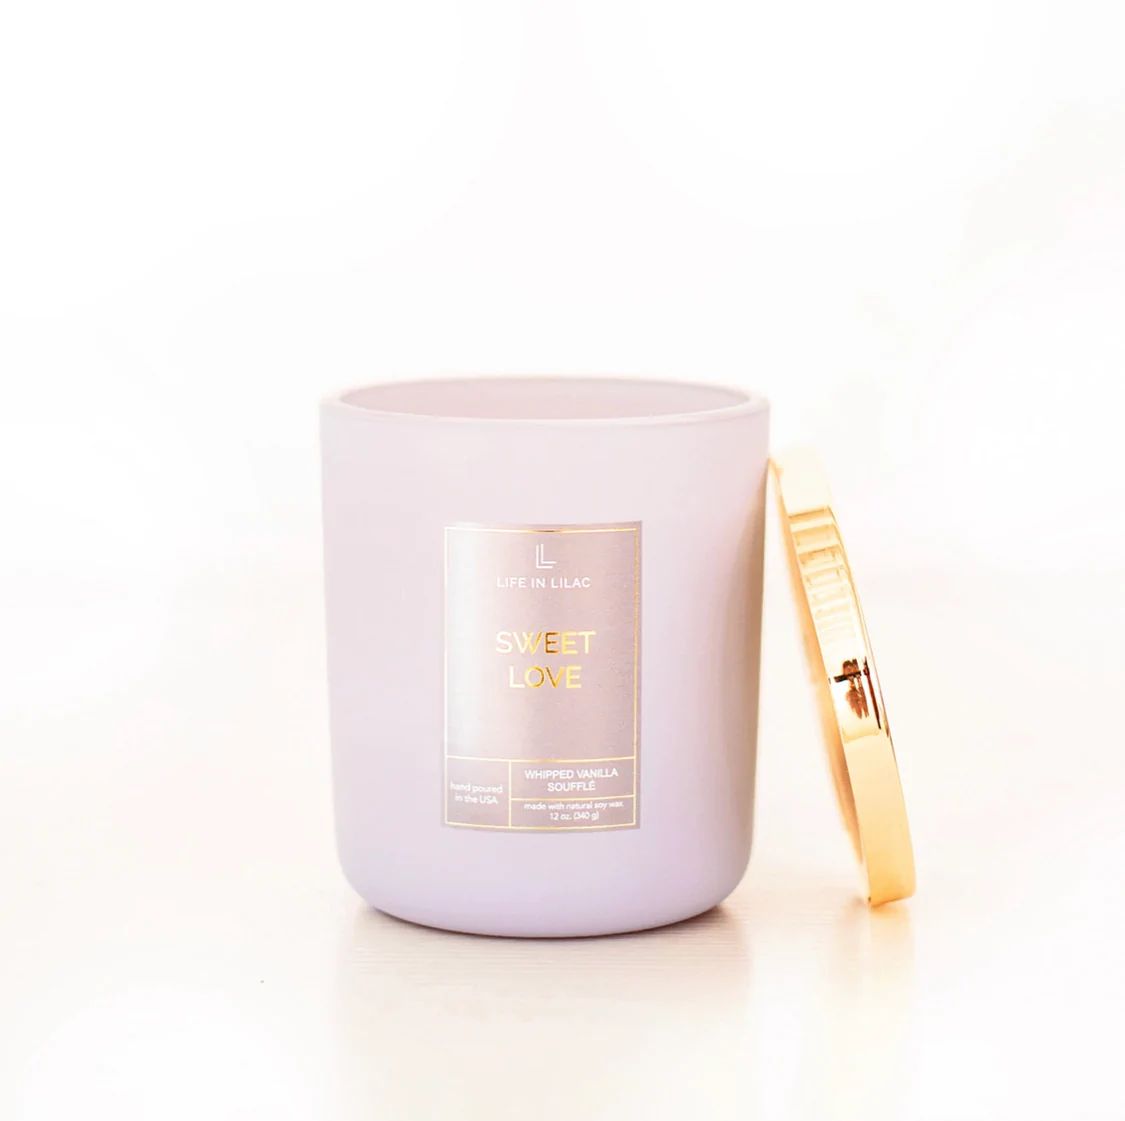 Sweet Love Candle | Life In Lilac